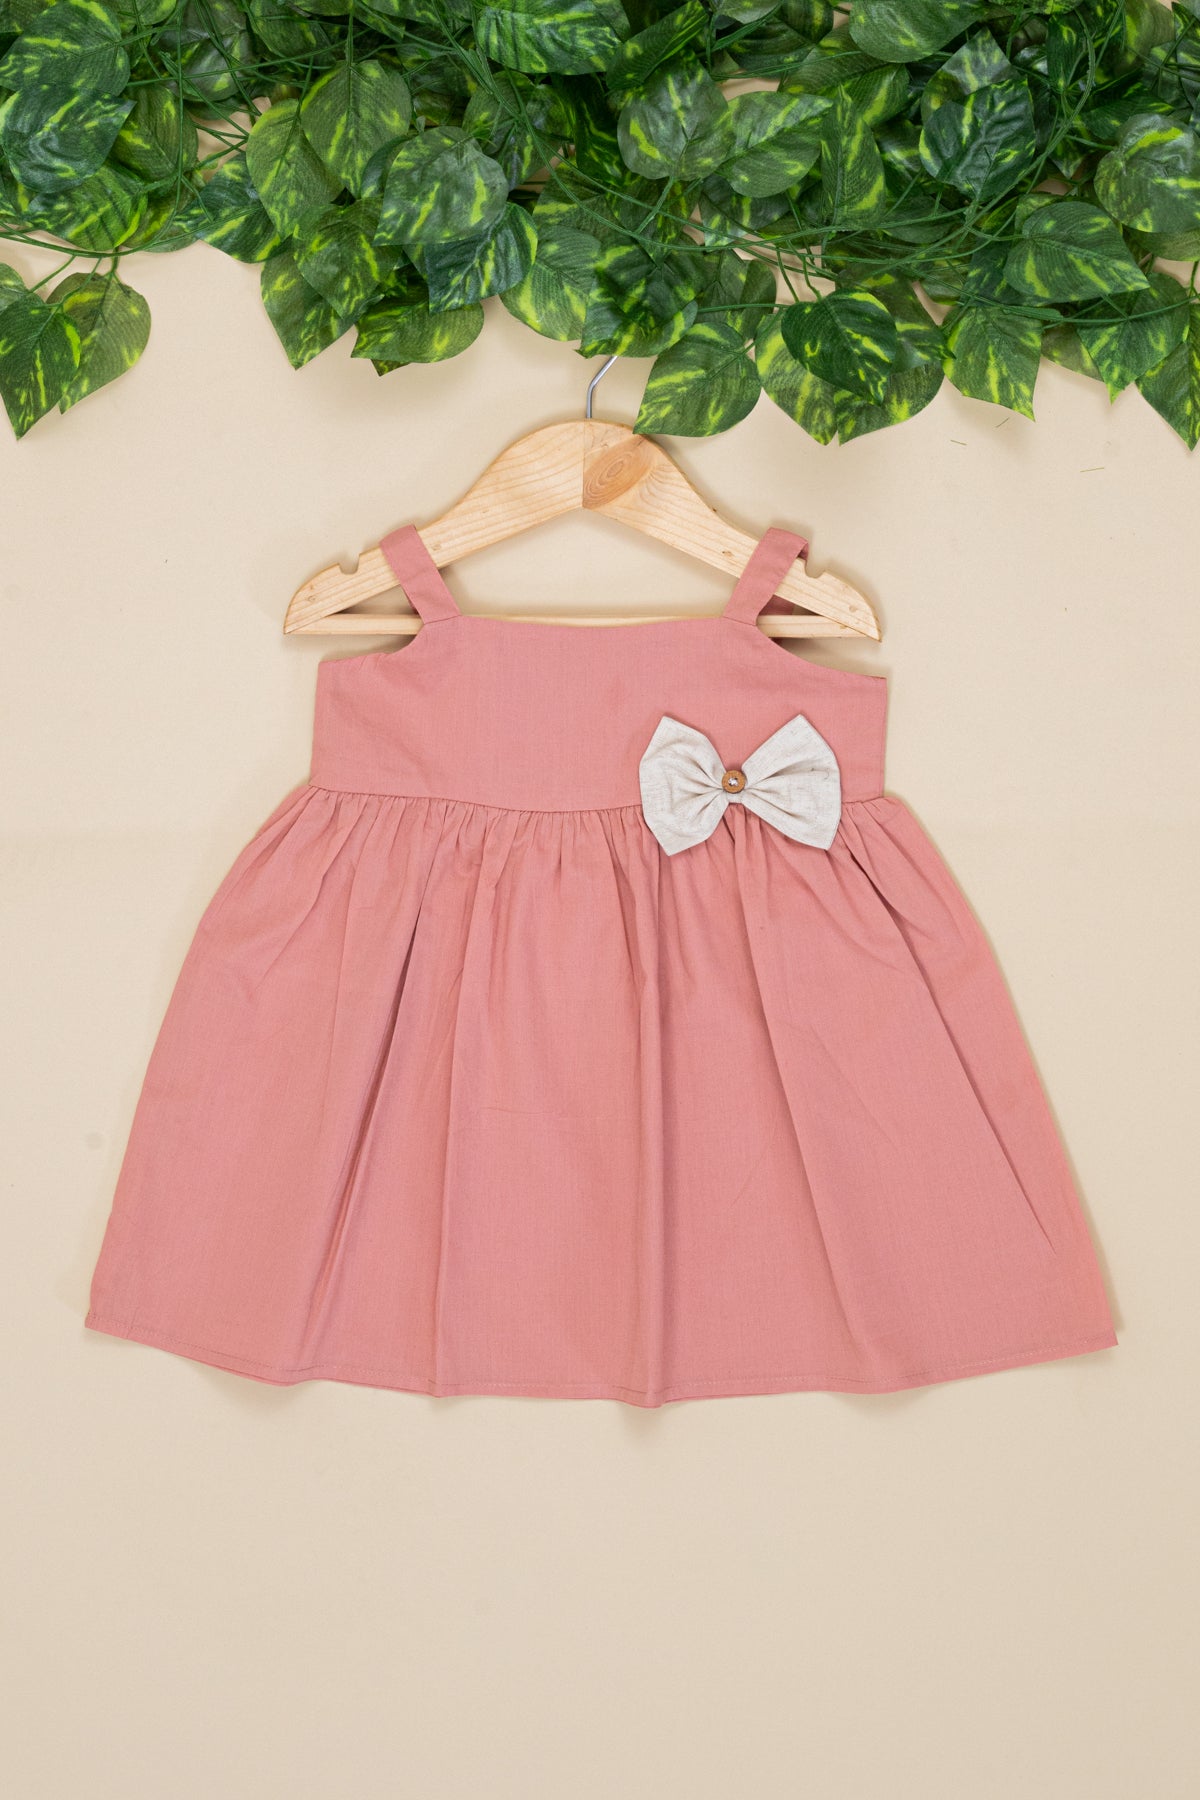 Candy Blush Cotton Bow Dress for Kids